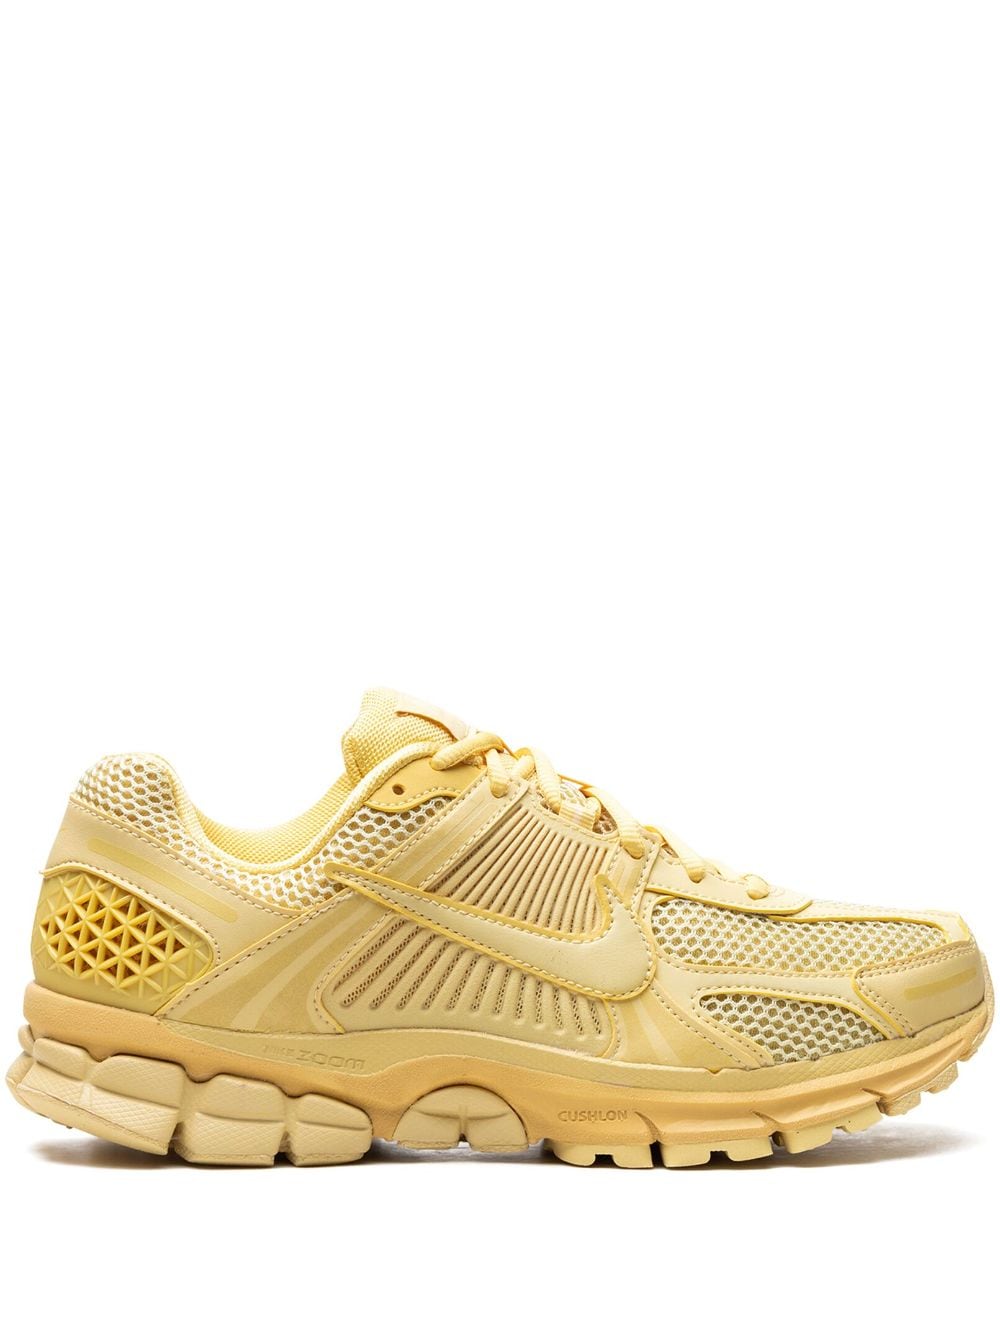 Zoom Vomero 5 "Saturn Gold" sneakers